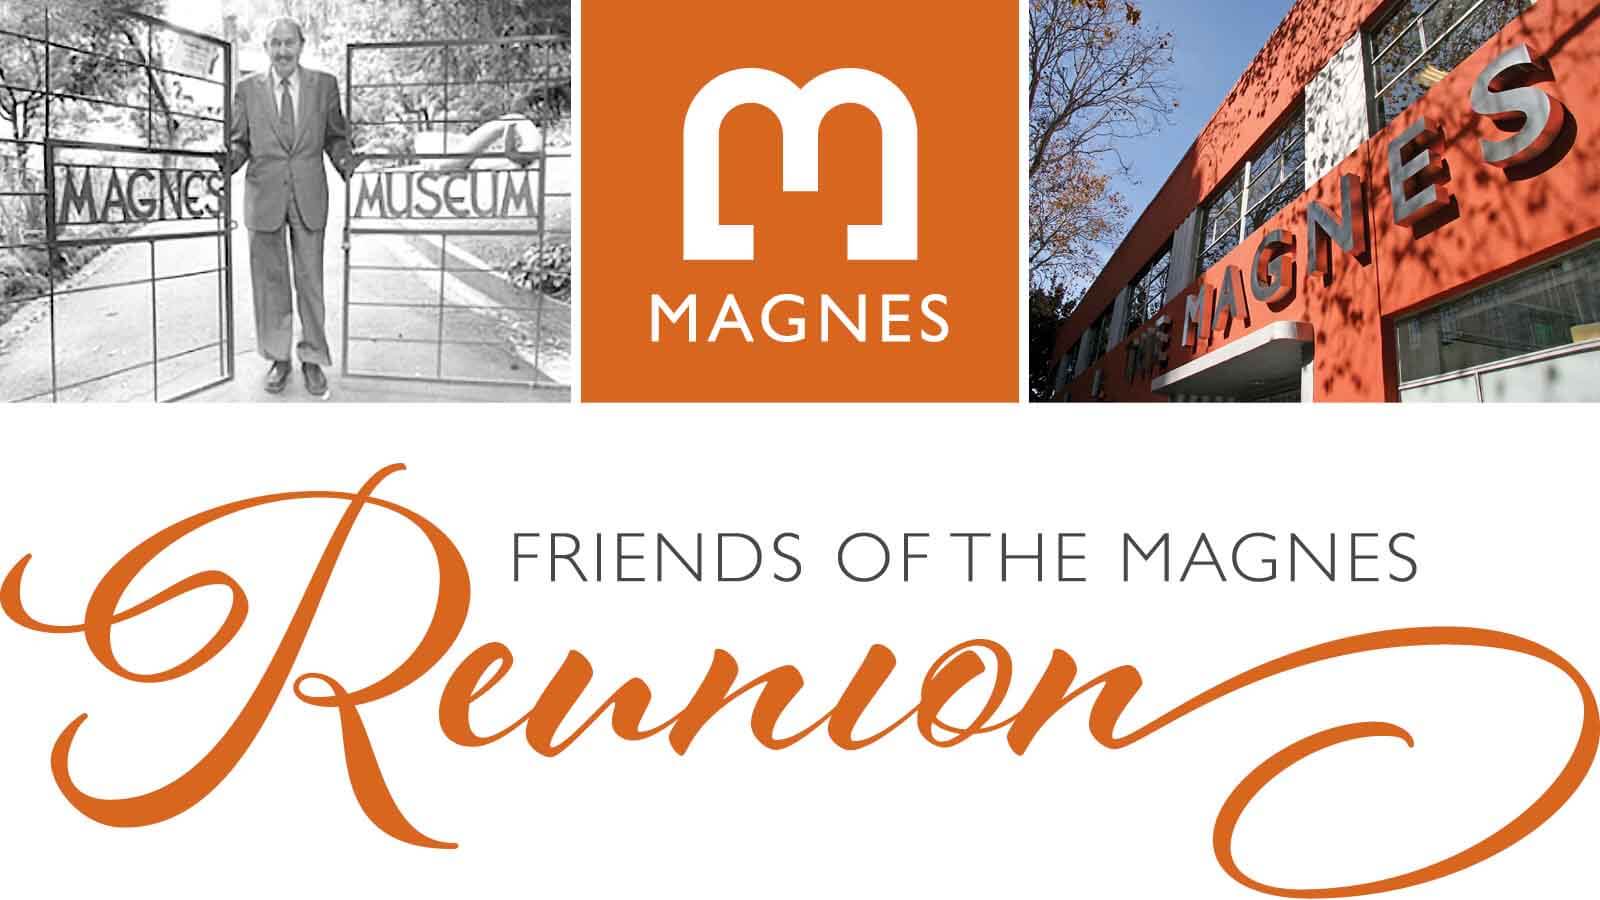 Pictures of Seymour Fromer opening the gates to the Judah L. Magnes Museum, the Magnes logo in orange, and the front of the Magnes collection building. Type below images reads "Friends of The Magnes Reunion"